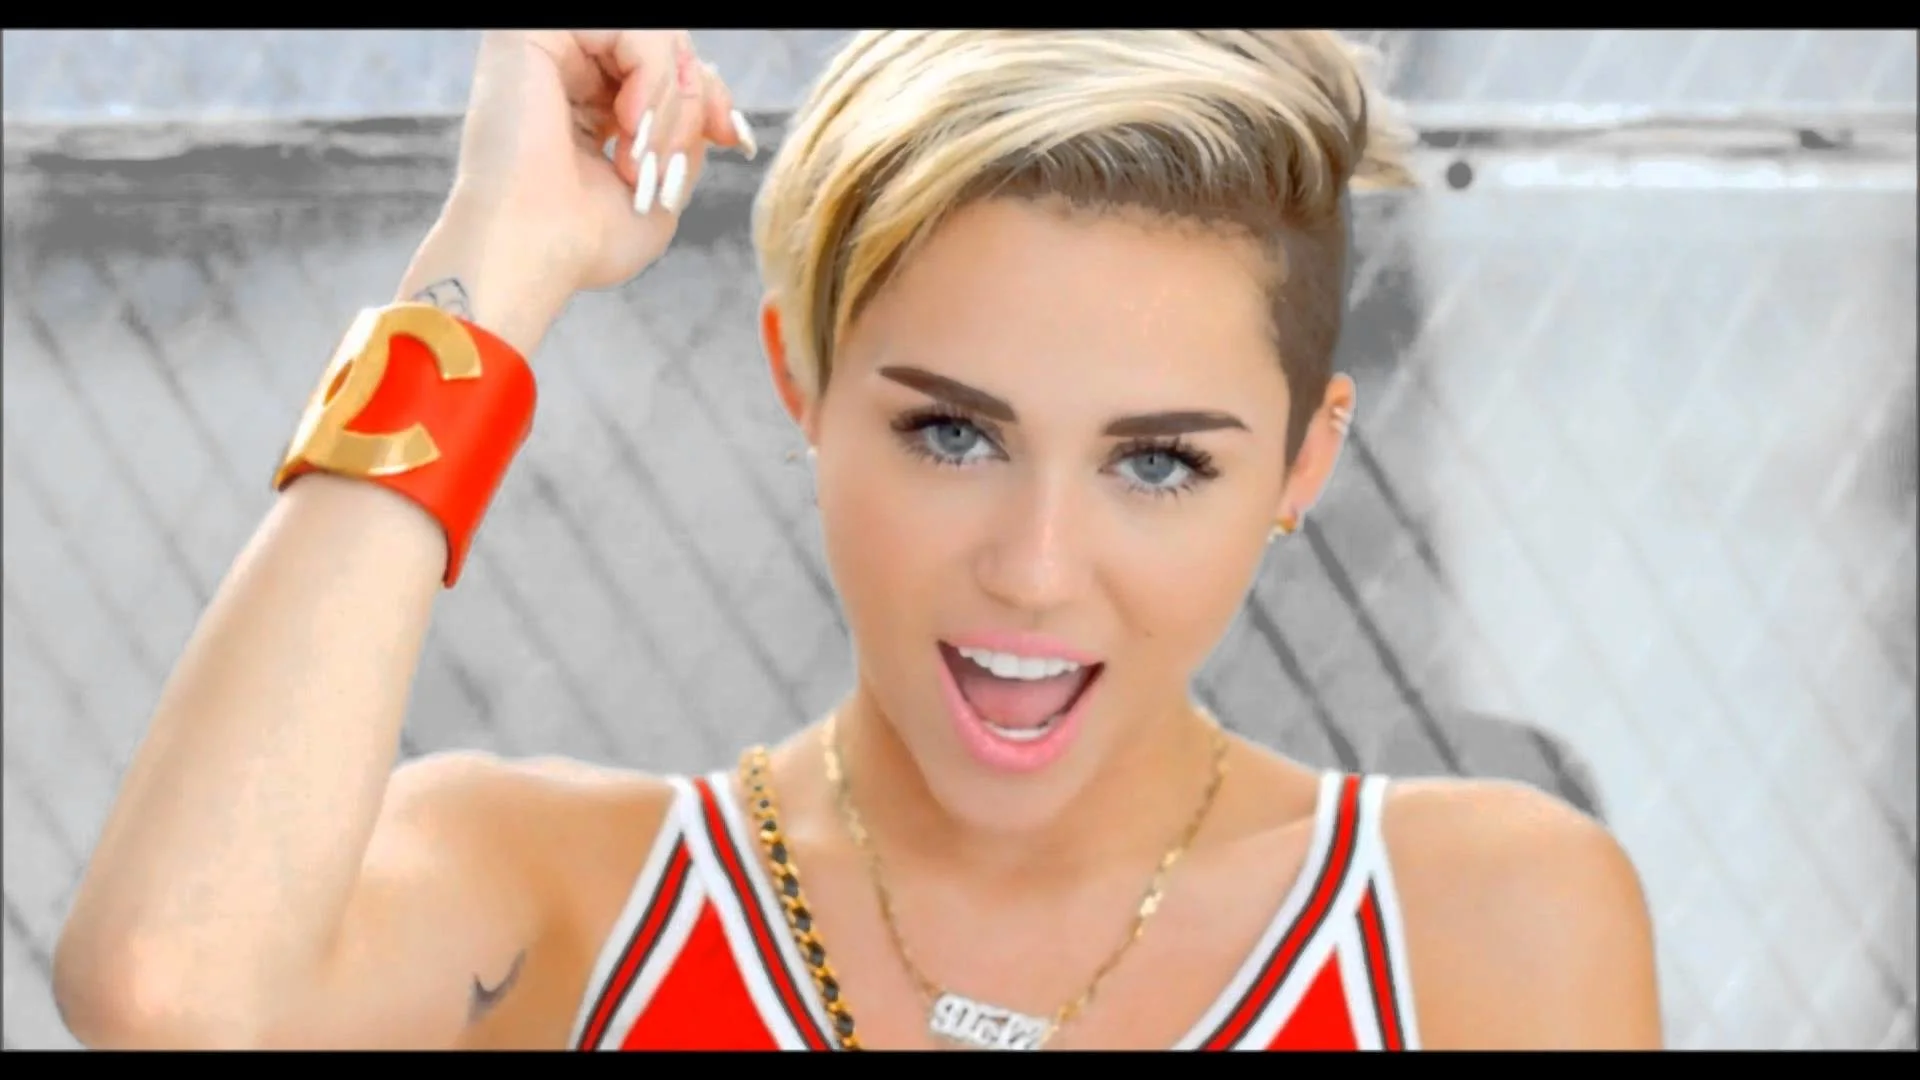 Mike WiLL Made-It — 23 ft Miley Cyrus, Juicy J & Wiz Khalifa (Speed Up)